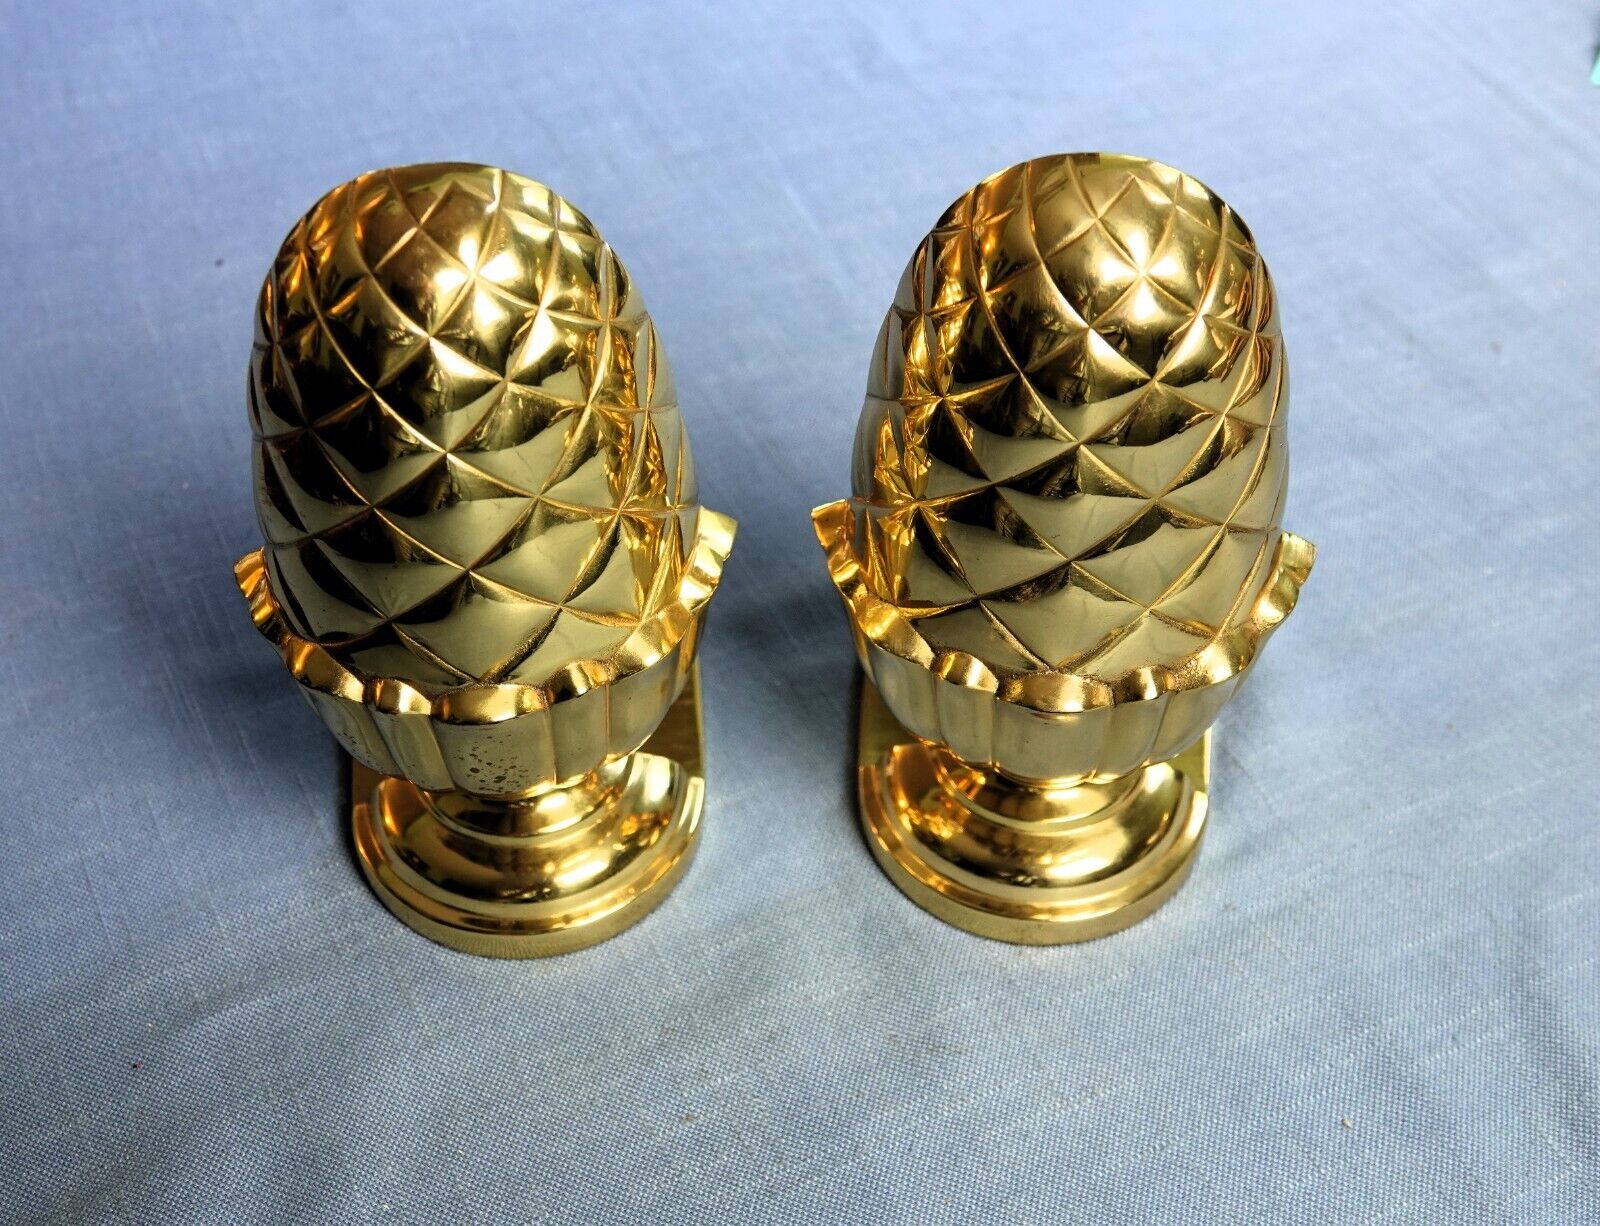 SET OF 2 BOOKENDS GOLD LACQUERED METAL PINEAPPLE THEME 7.0\